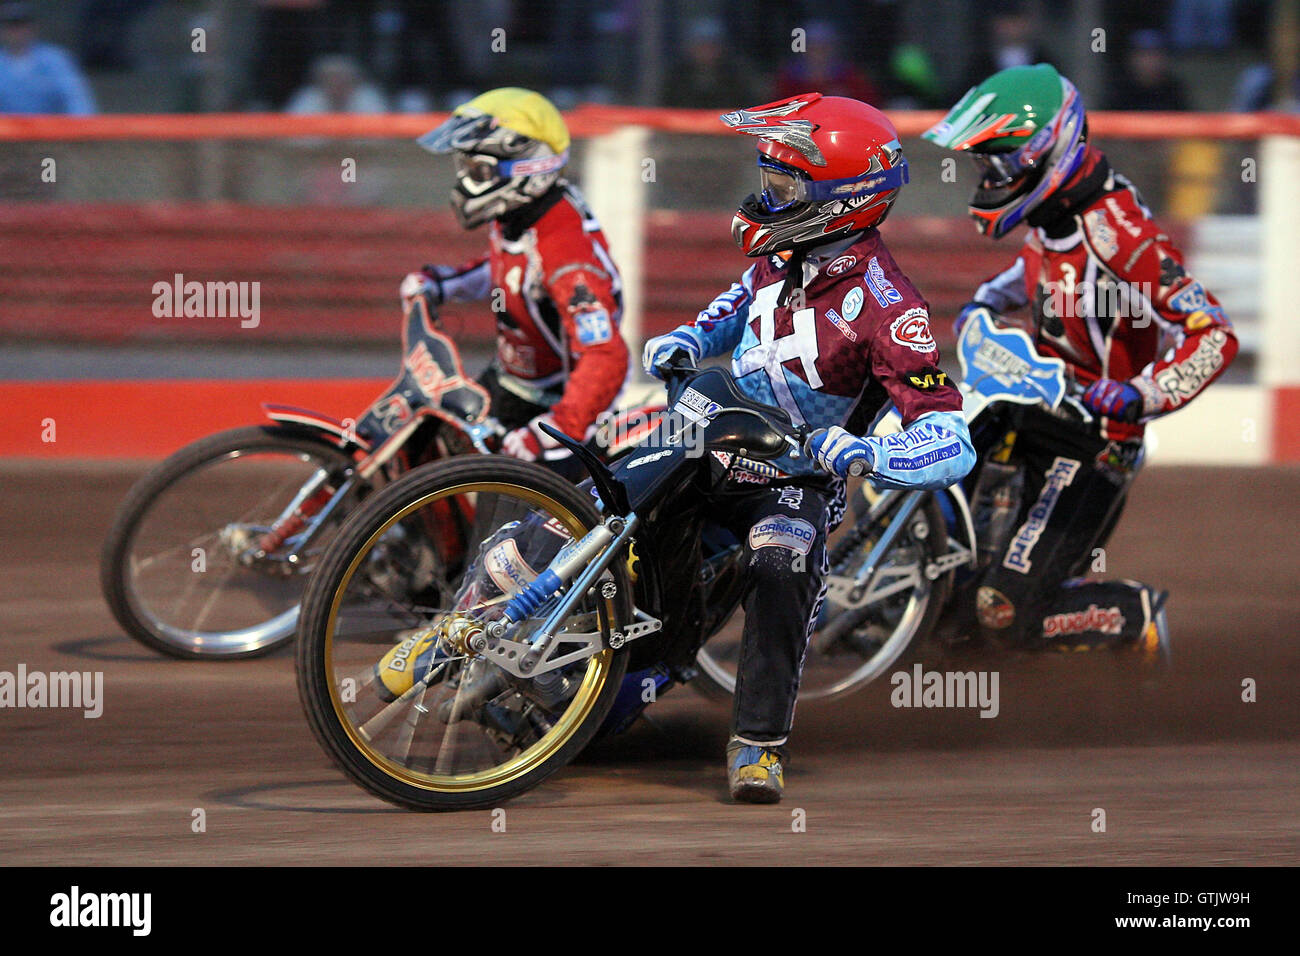 Heat 7: Jonas Davidsson (red), Morten Risager (yellow) and Patrick Hougaard  - Lakeside Hammers vs Belle Vue Aces - Sky Sports Elite League Speedway at  Arena Essex Raceway, Purfleet - 31/07/09 Stock Photo - Alamy